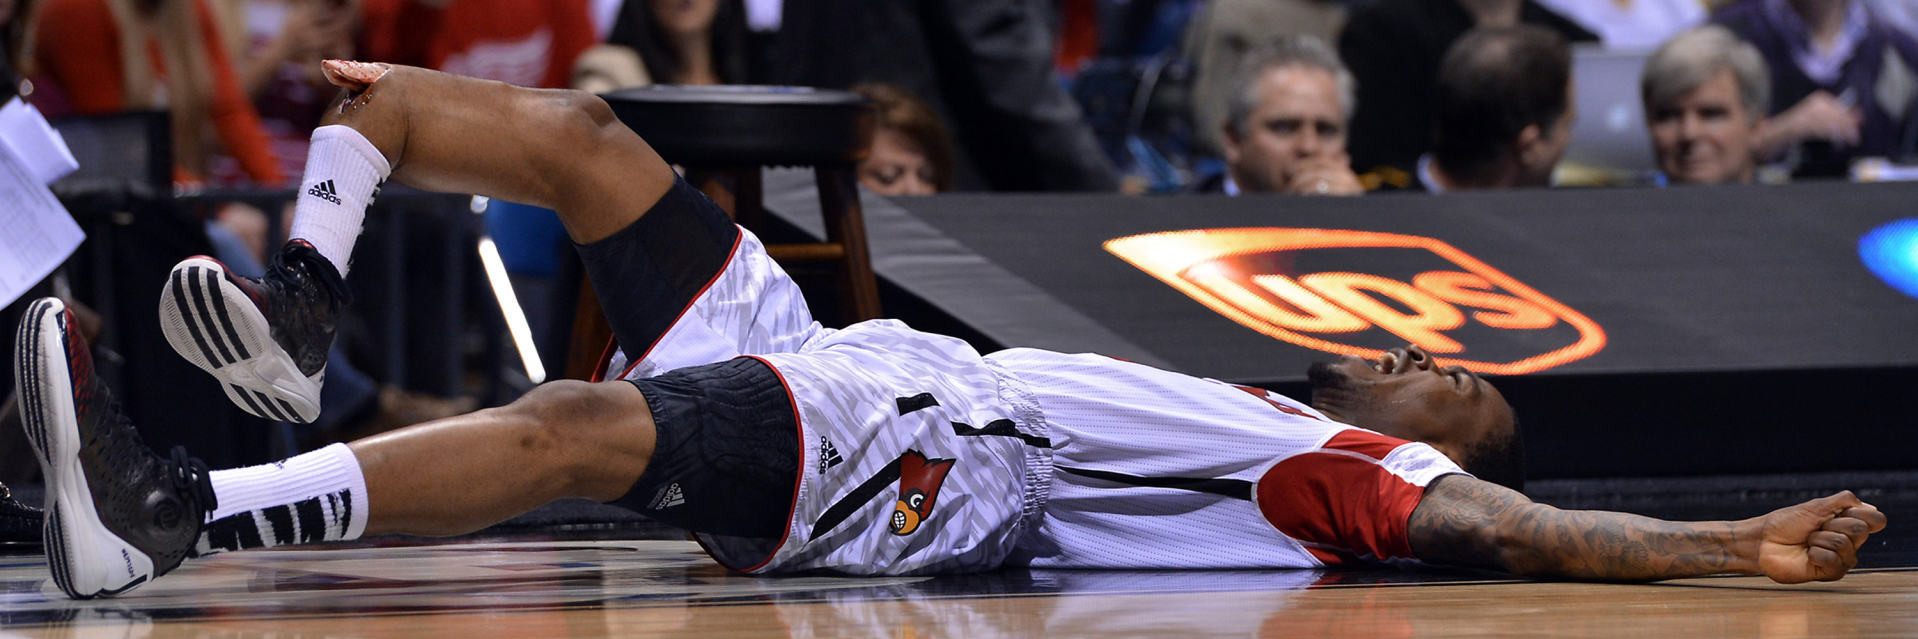 A high-definition picture of Kevin Ware's leg break.